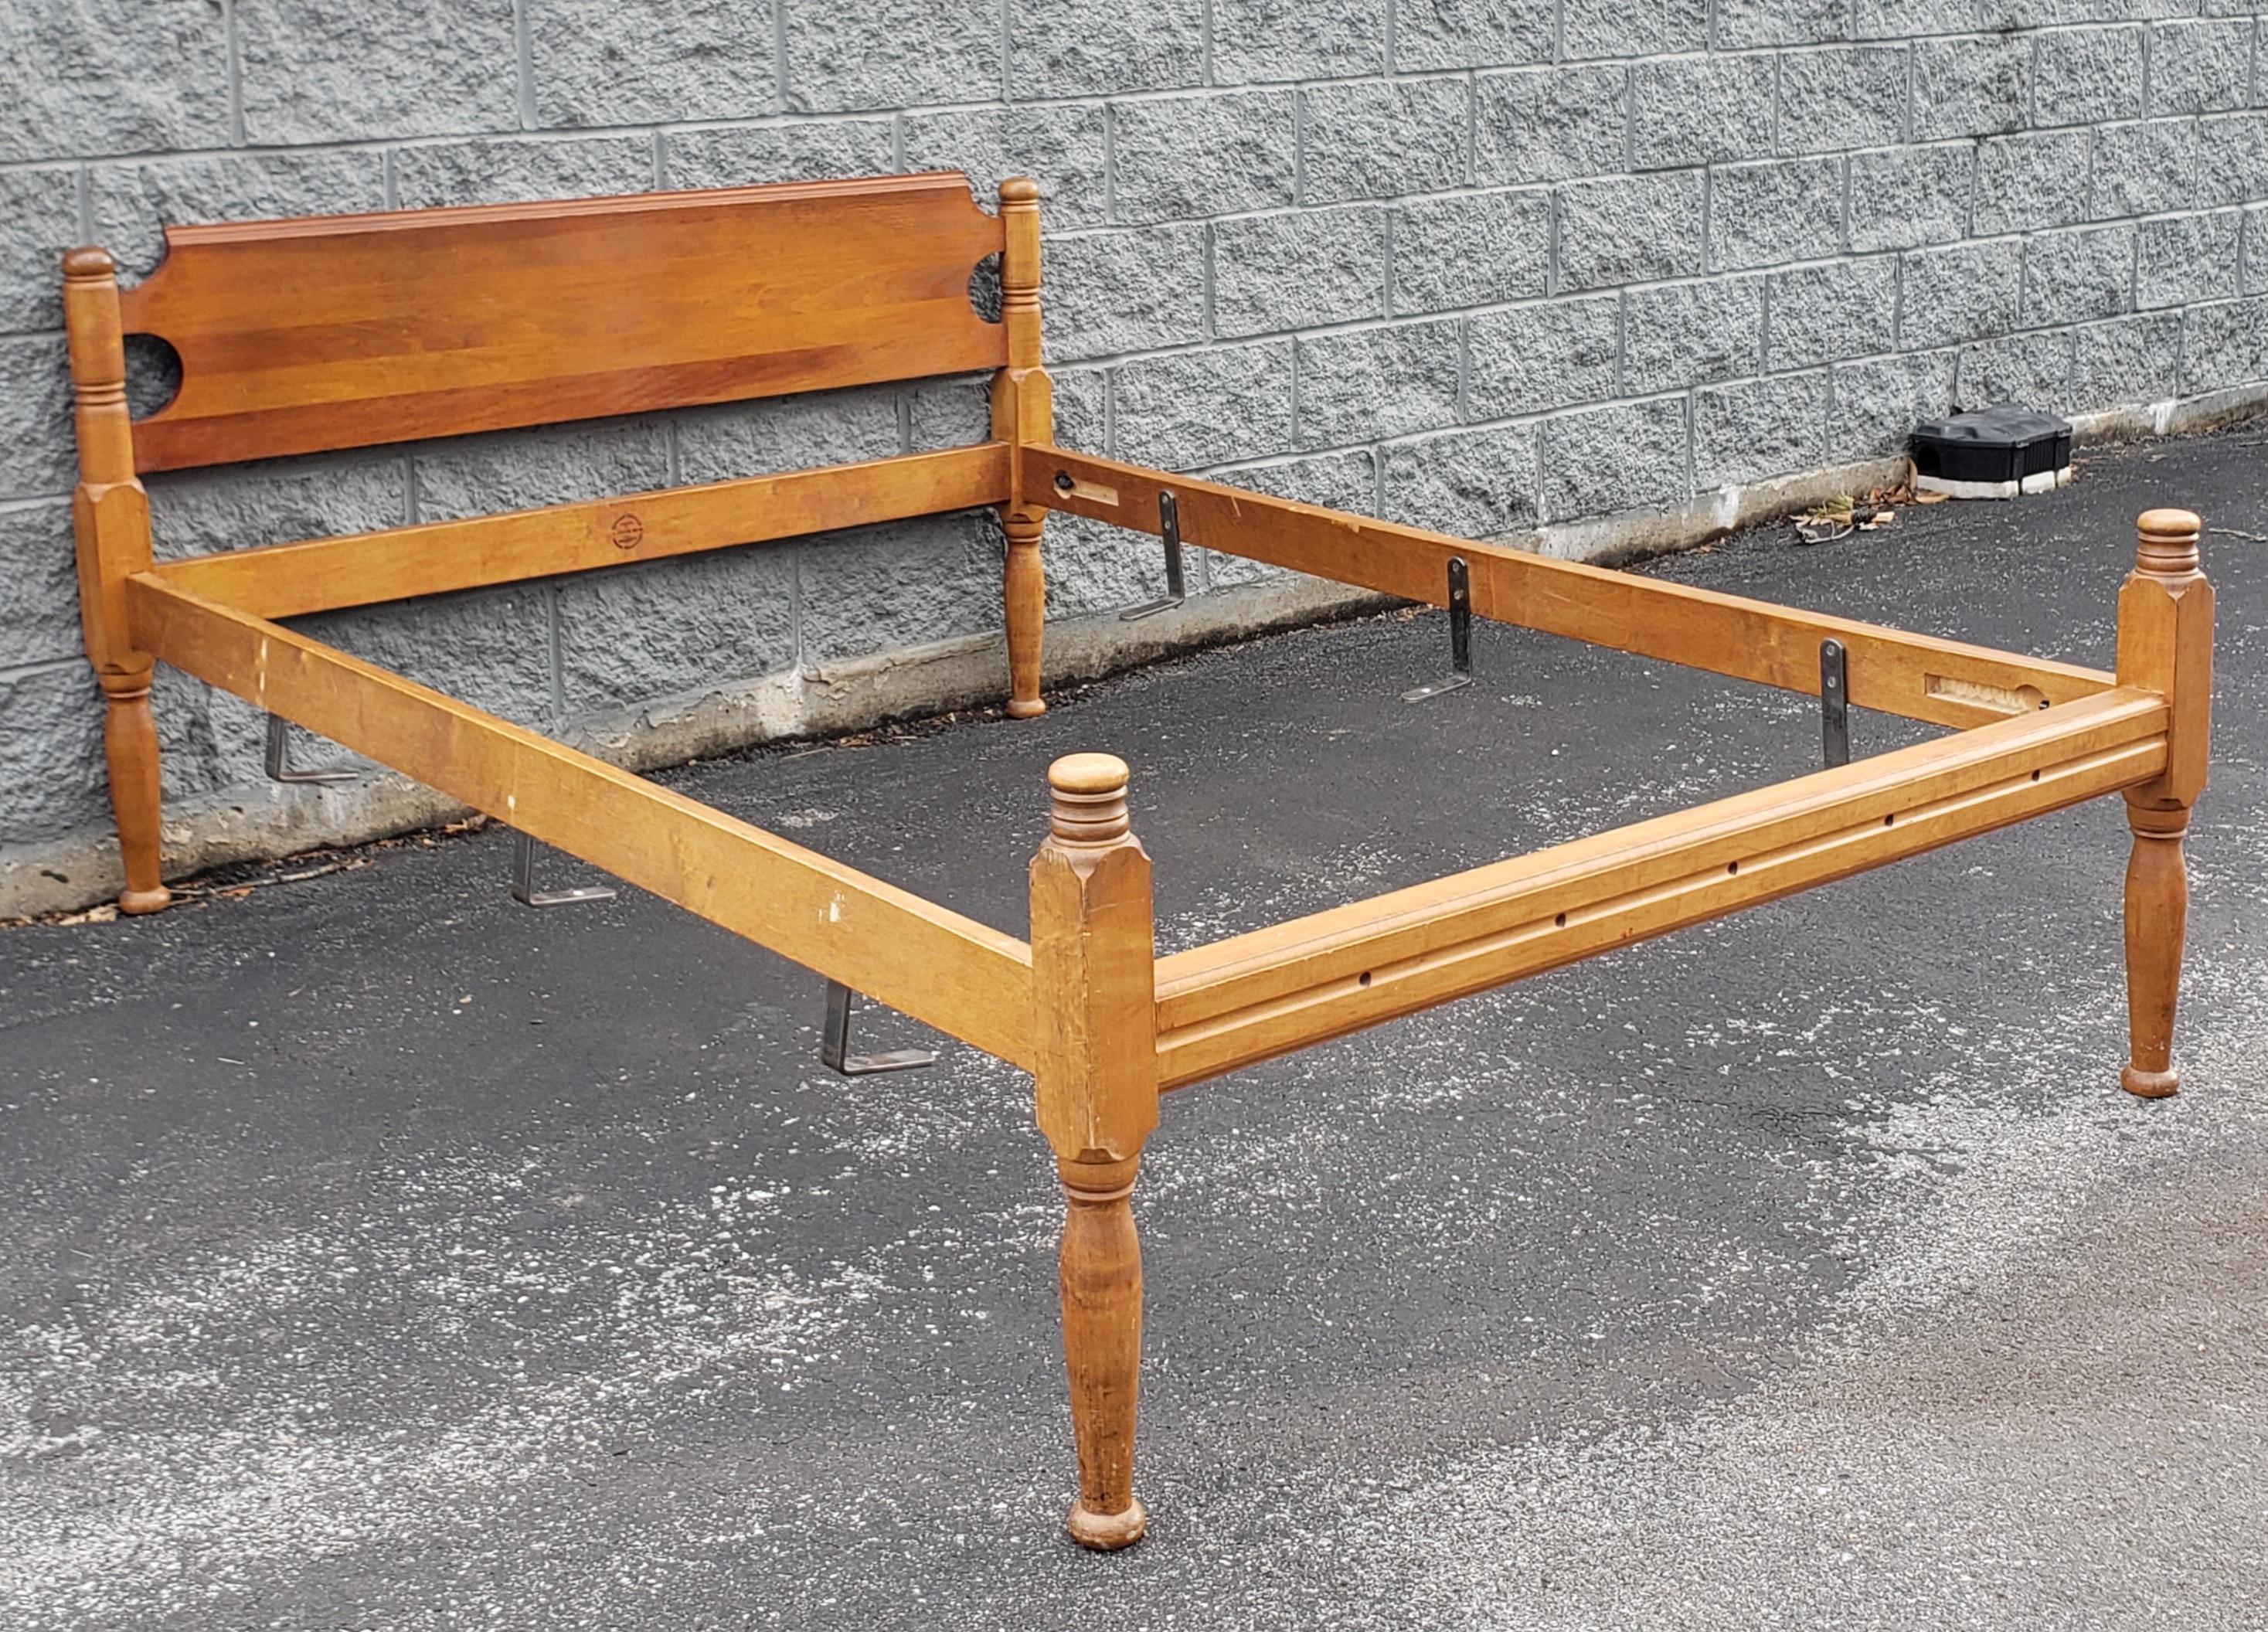 A Cohasset Colonials by Hagerty American Colonial Style Maple Full Size Bedframe in good vintage condition.  